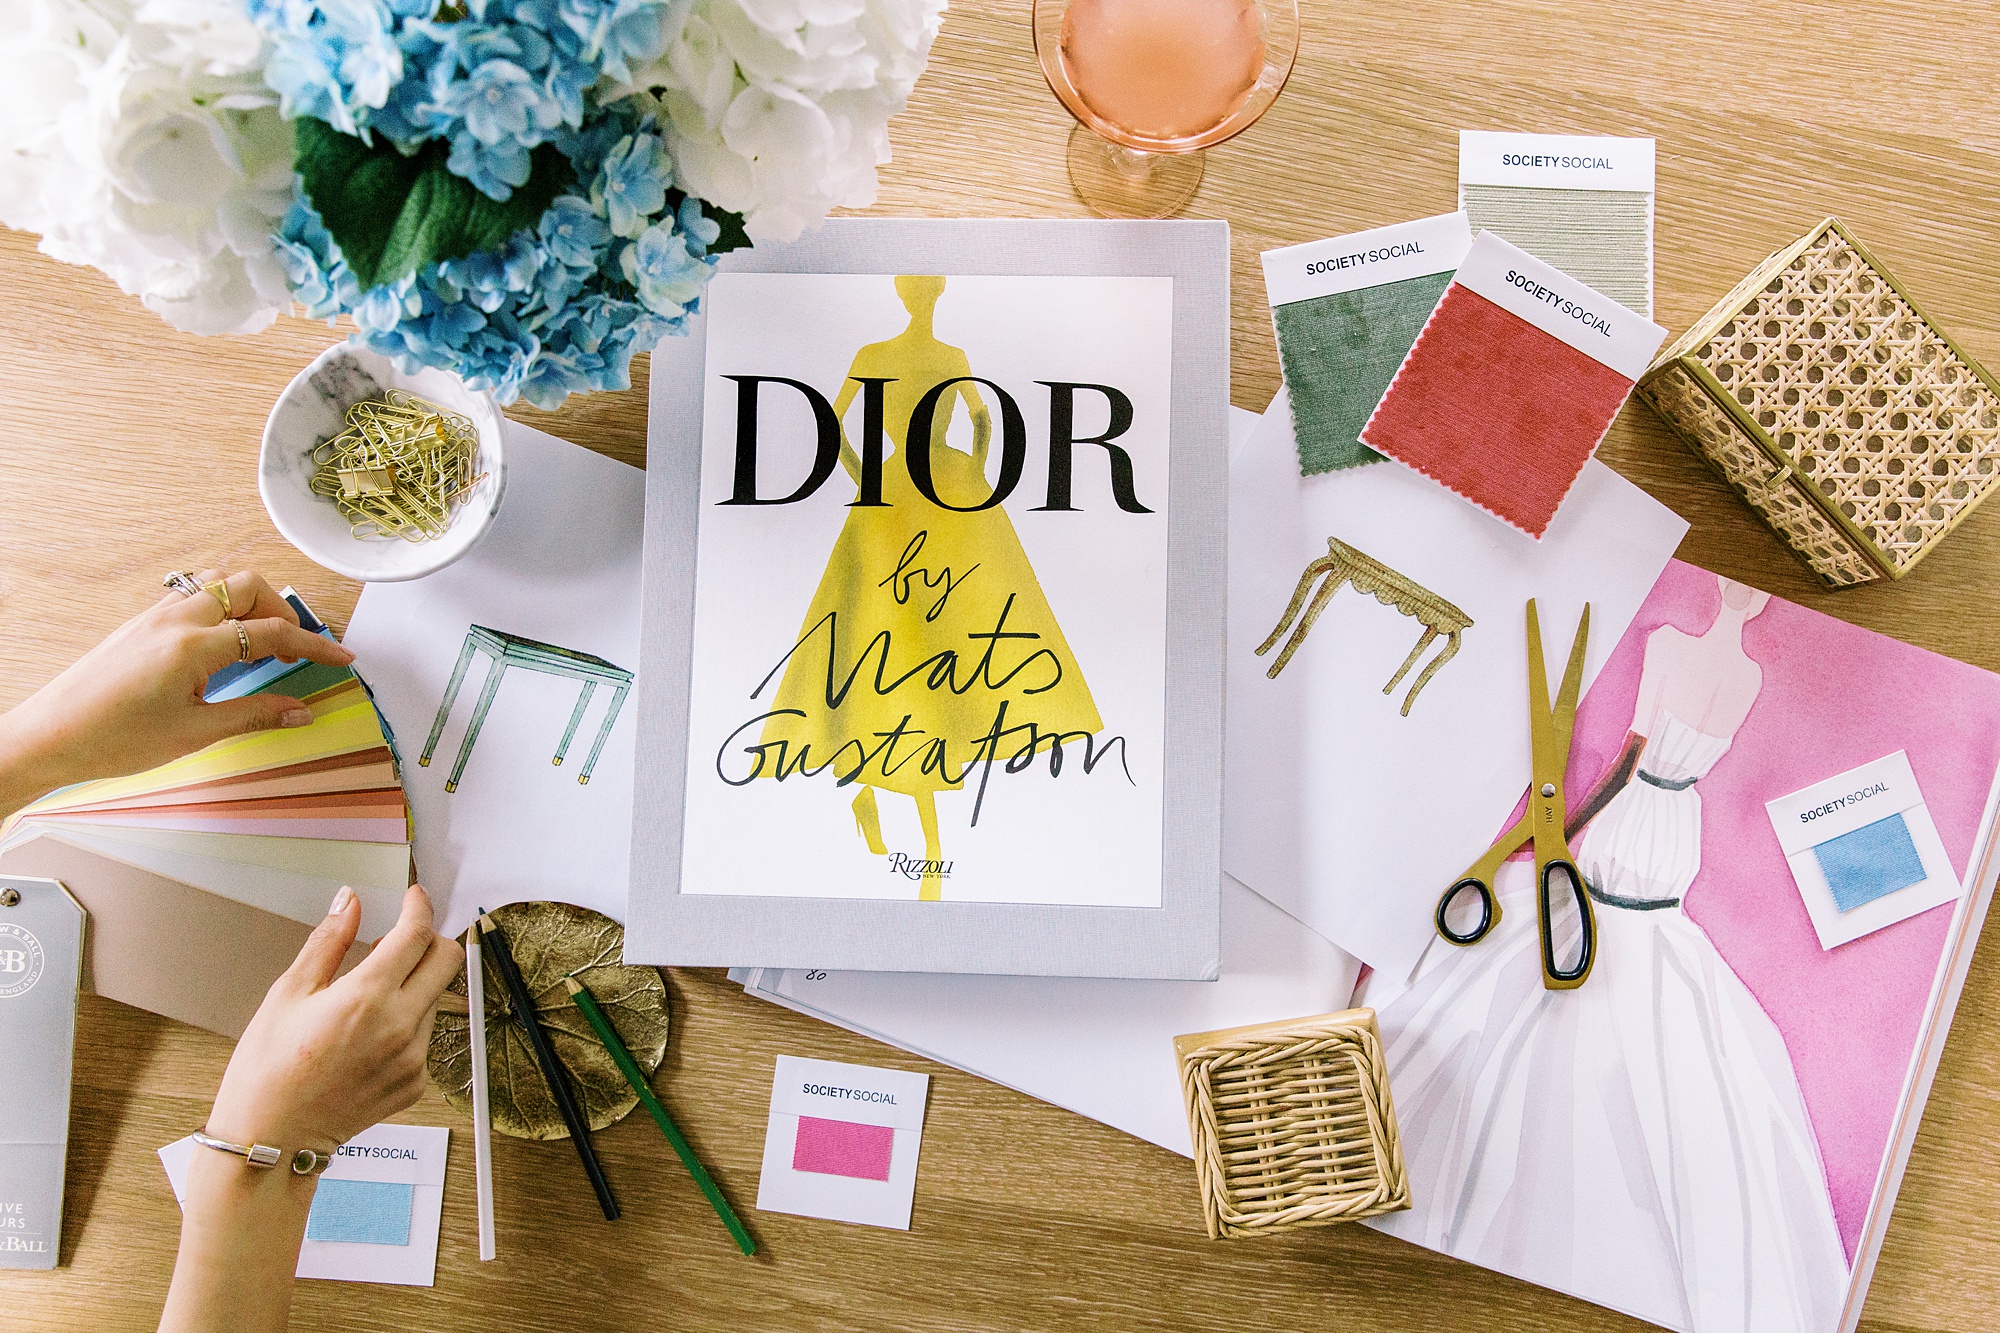 Dior design book lies on swatches of fabric